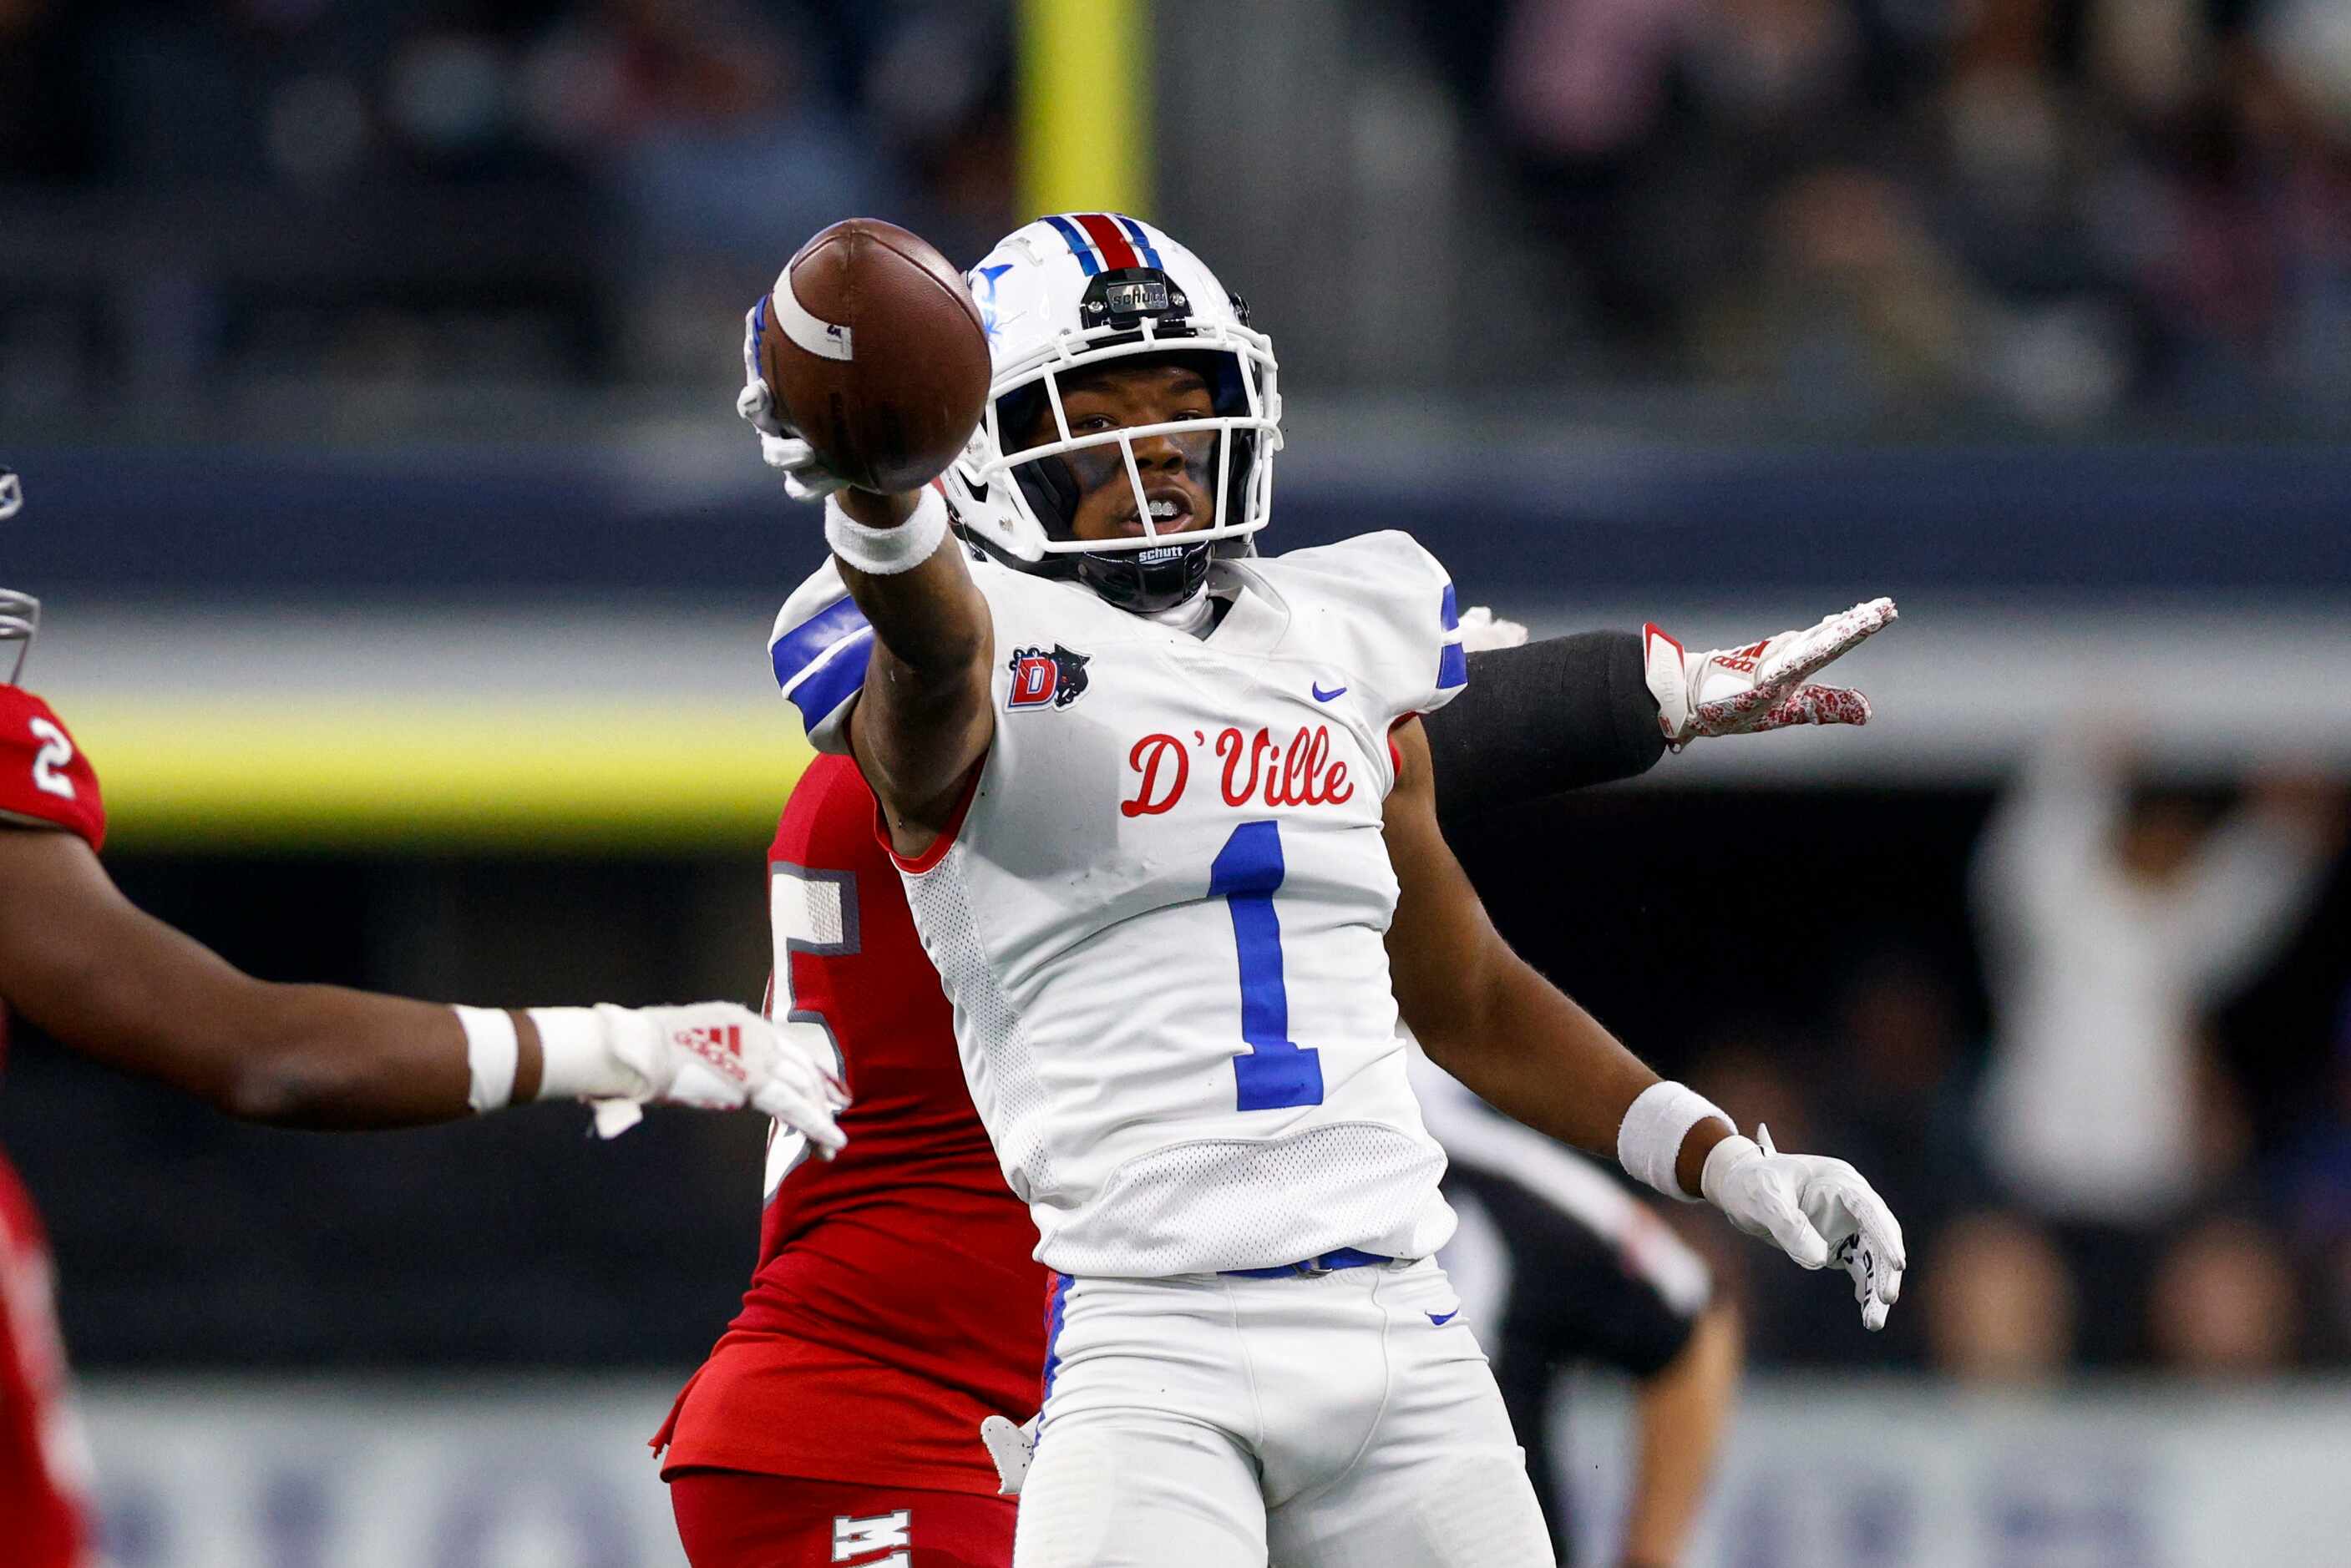 Duncanville wide receiver Lontrell Turner (1) celebrates a catch during the first quarter of...